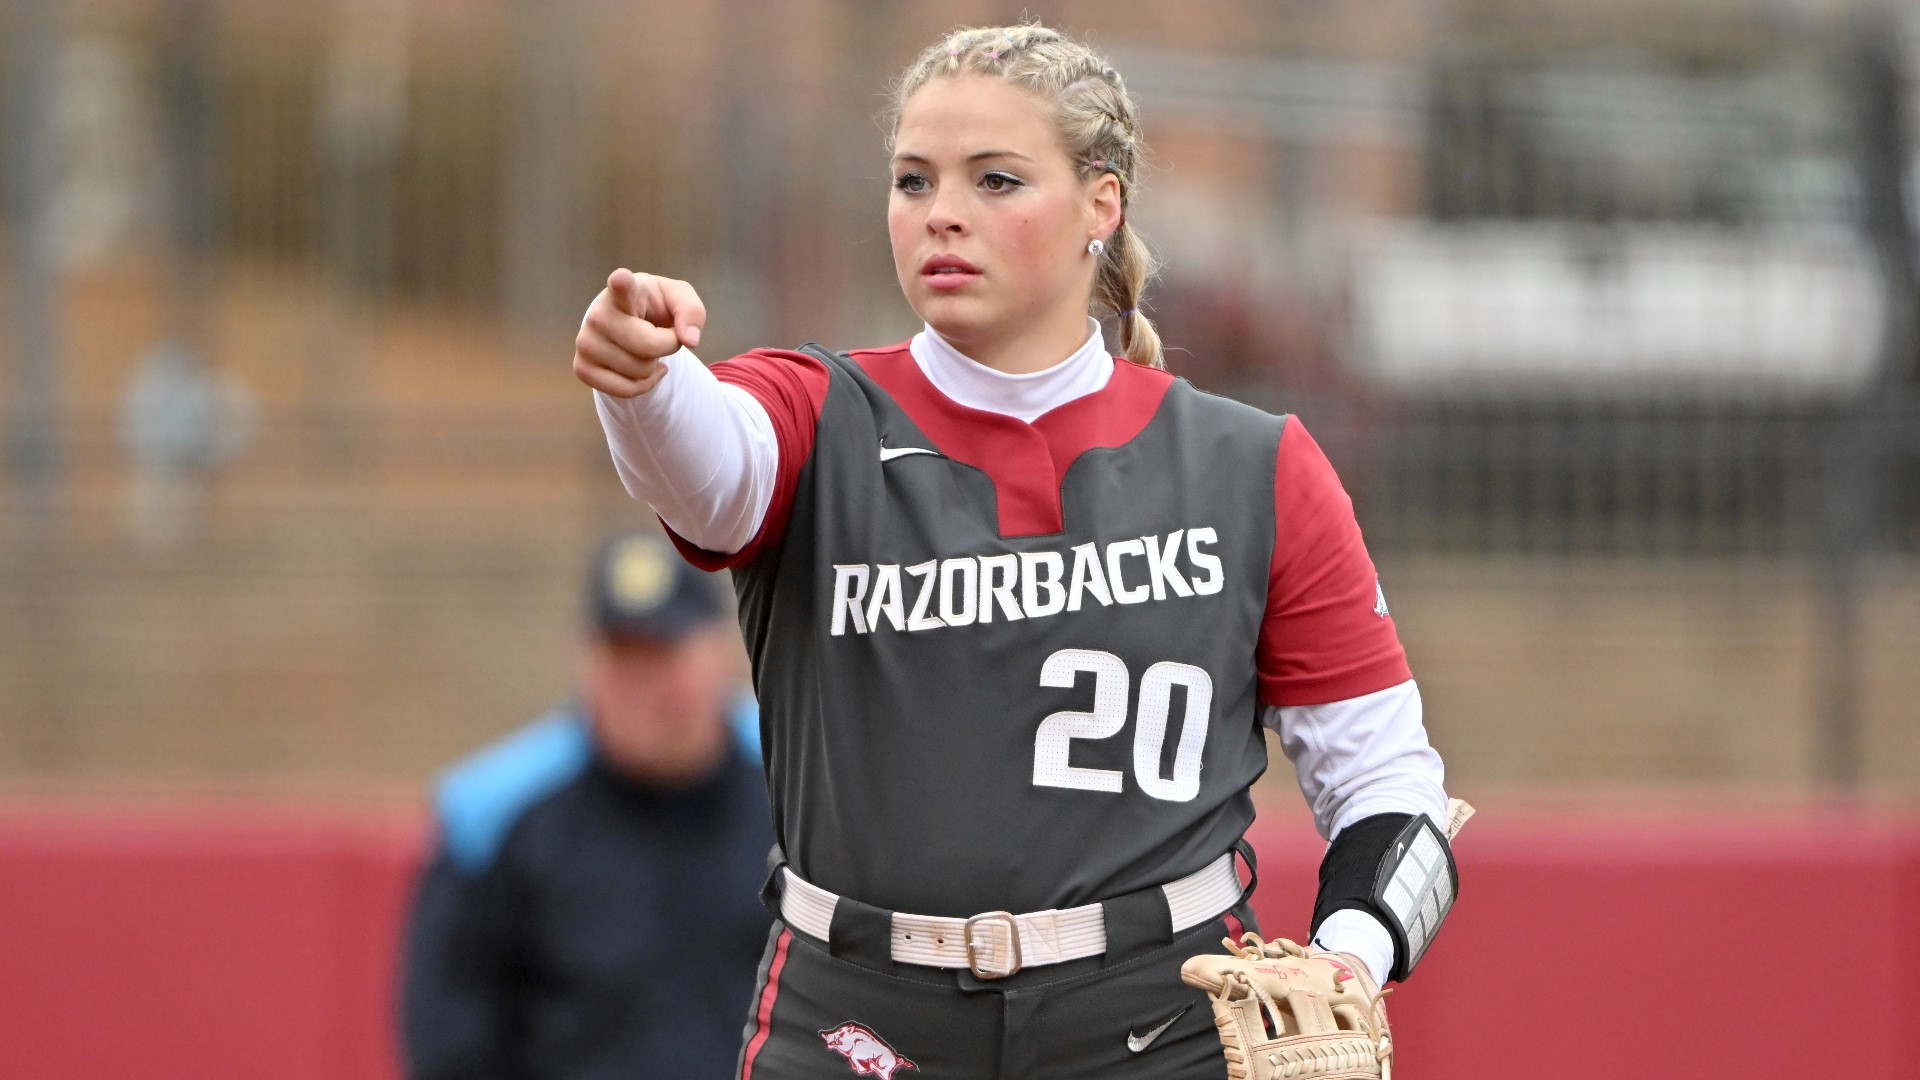 The Beebe native is set to begin her final season with Arkansas softball, which was picked to finish fourth in the SEC preseason poll.